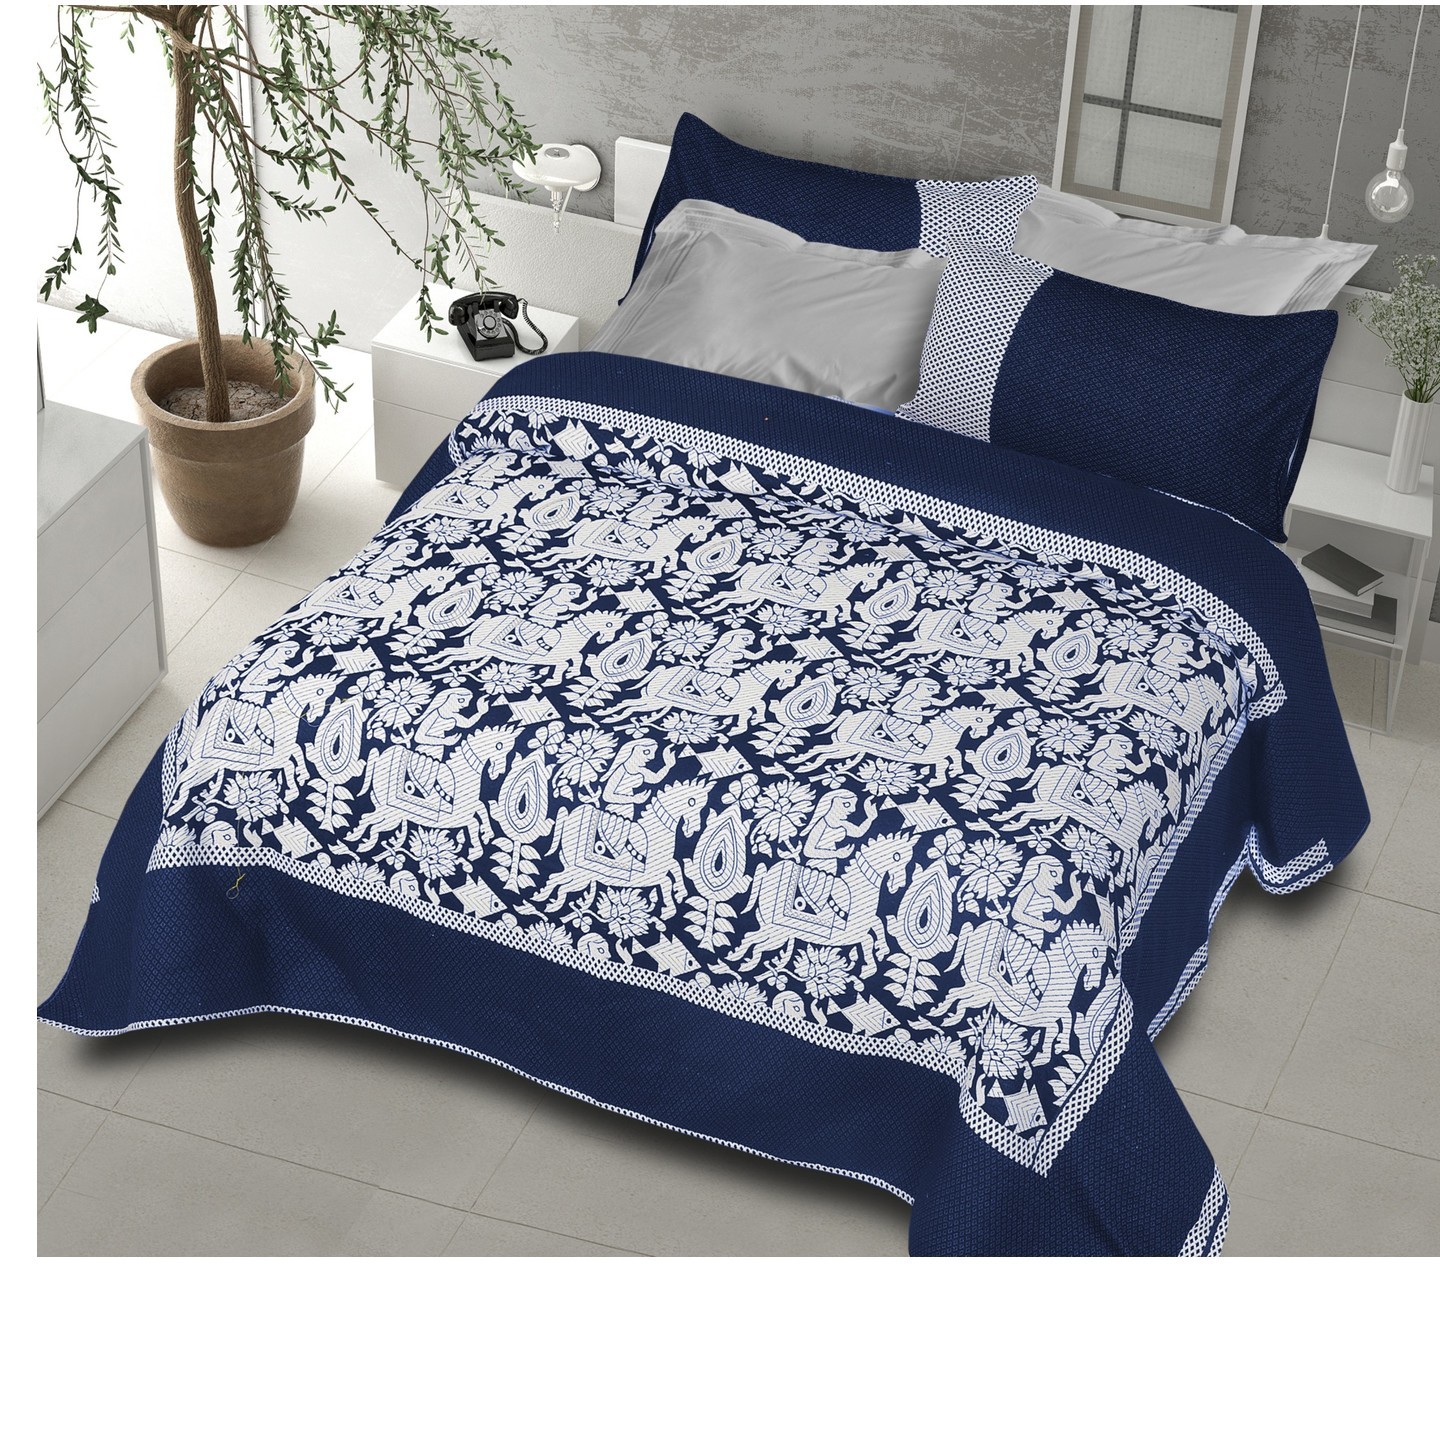 Handtex Home Jacquard design cotton double bedsheet 90x100 inch with 2 pillow cover Navy Blue